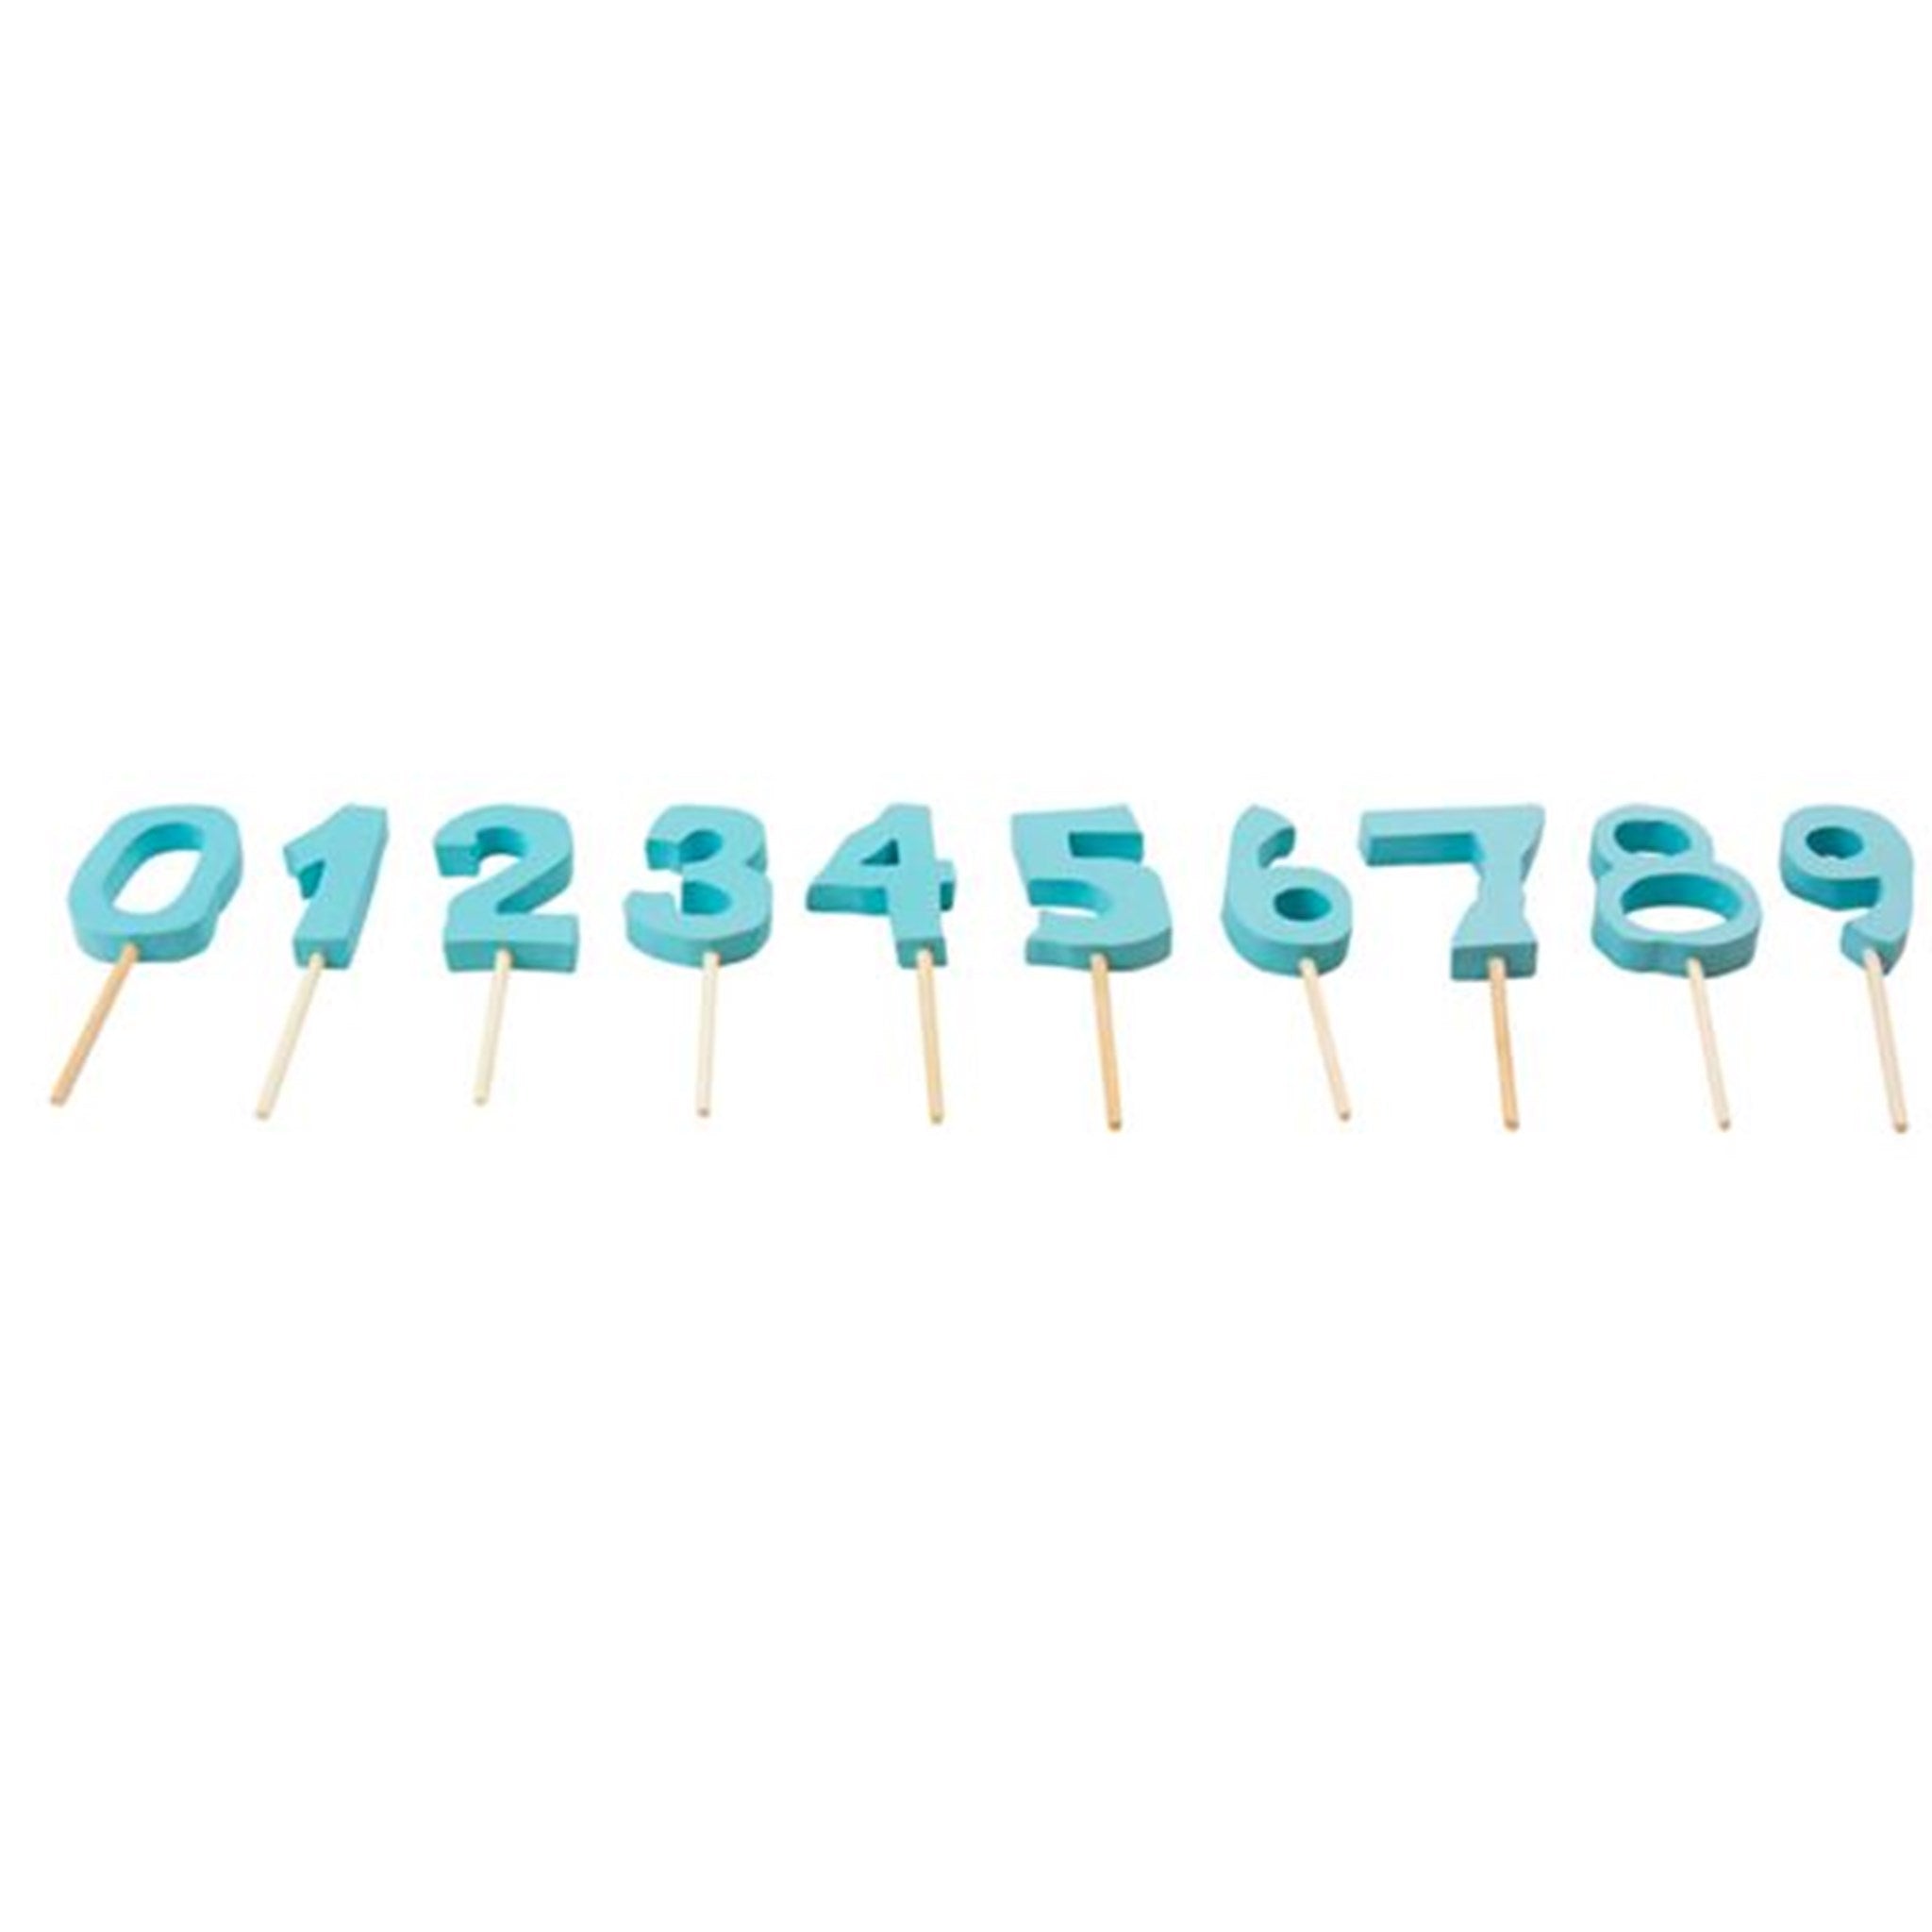 Kids by Friis Birthday Cake Numbers Blue